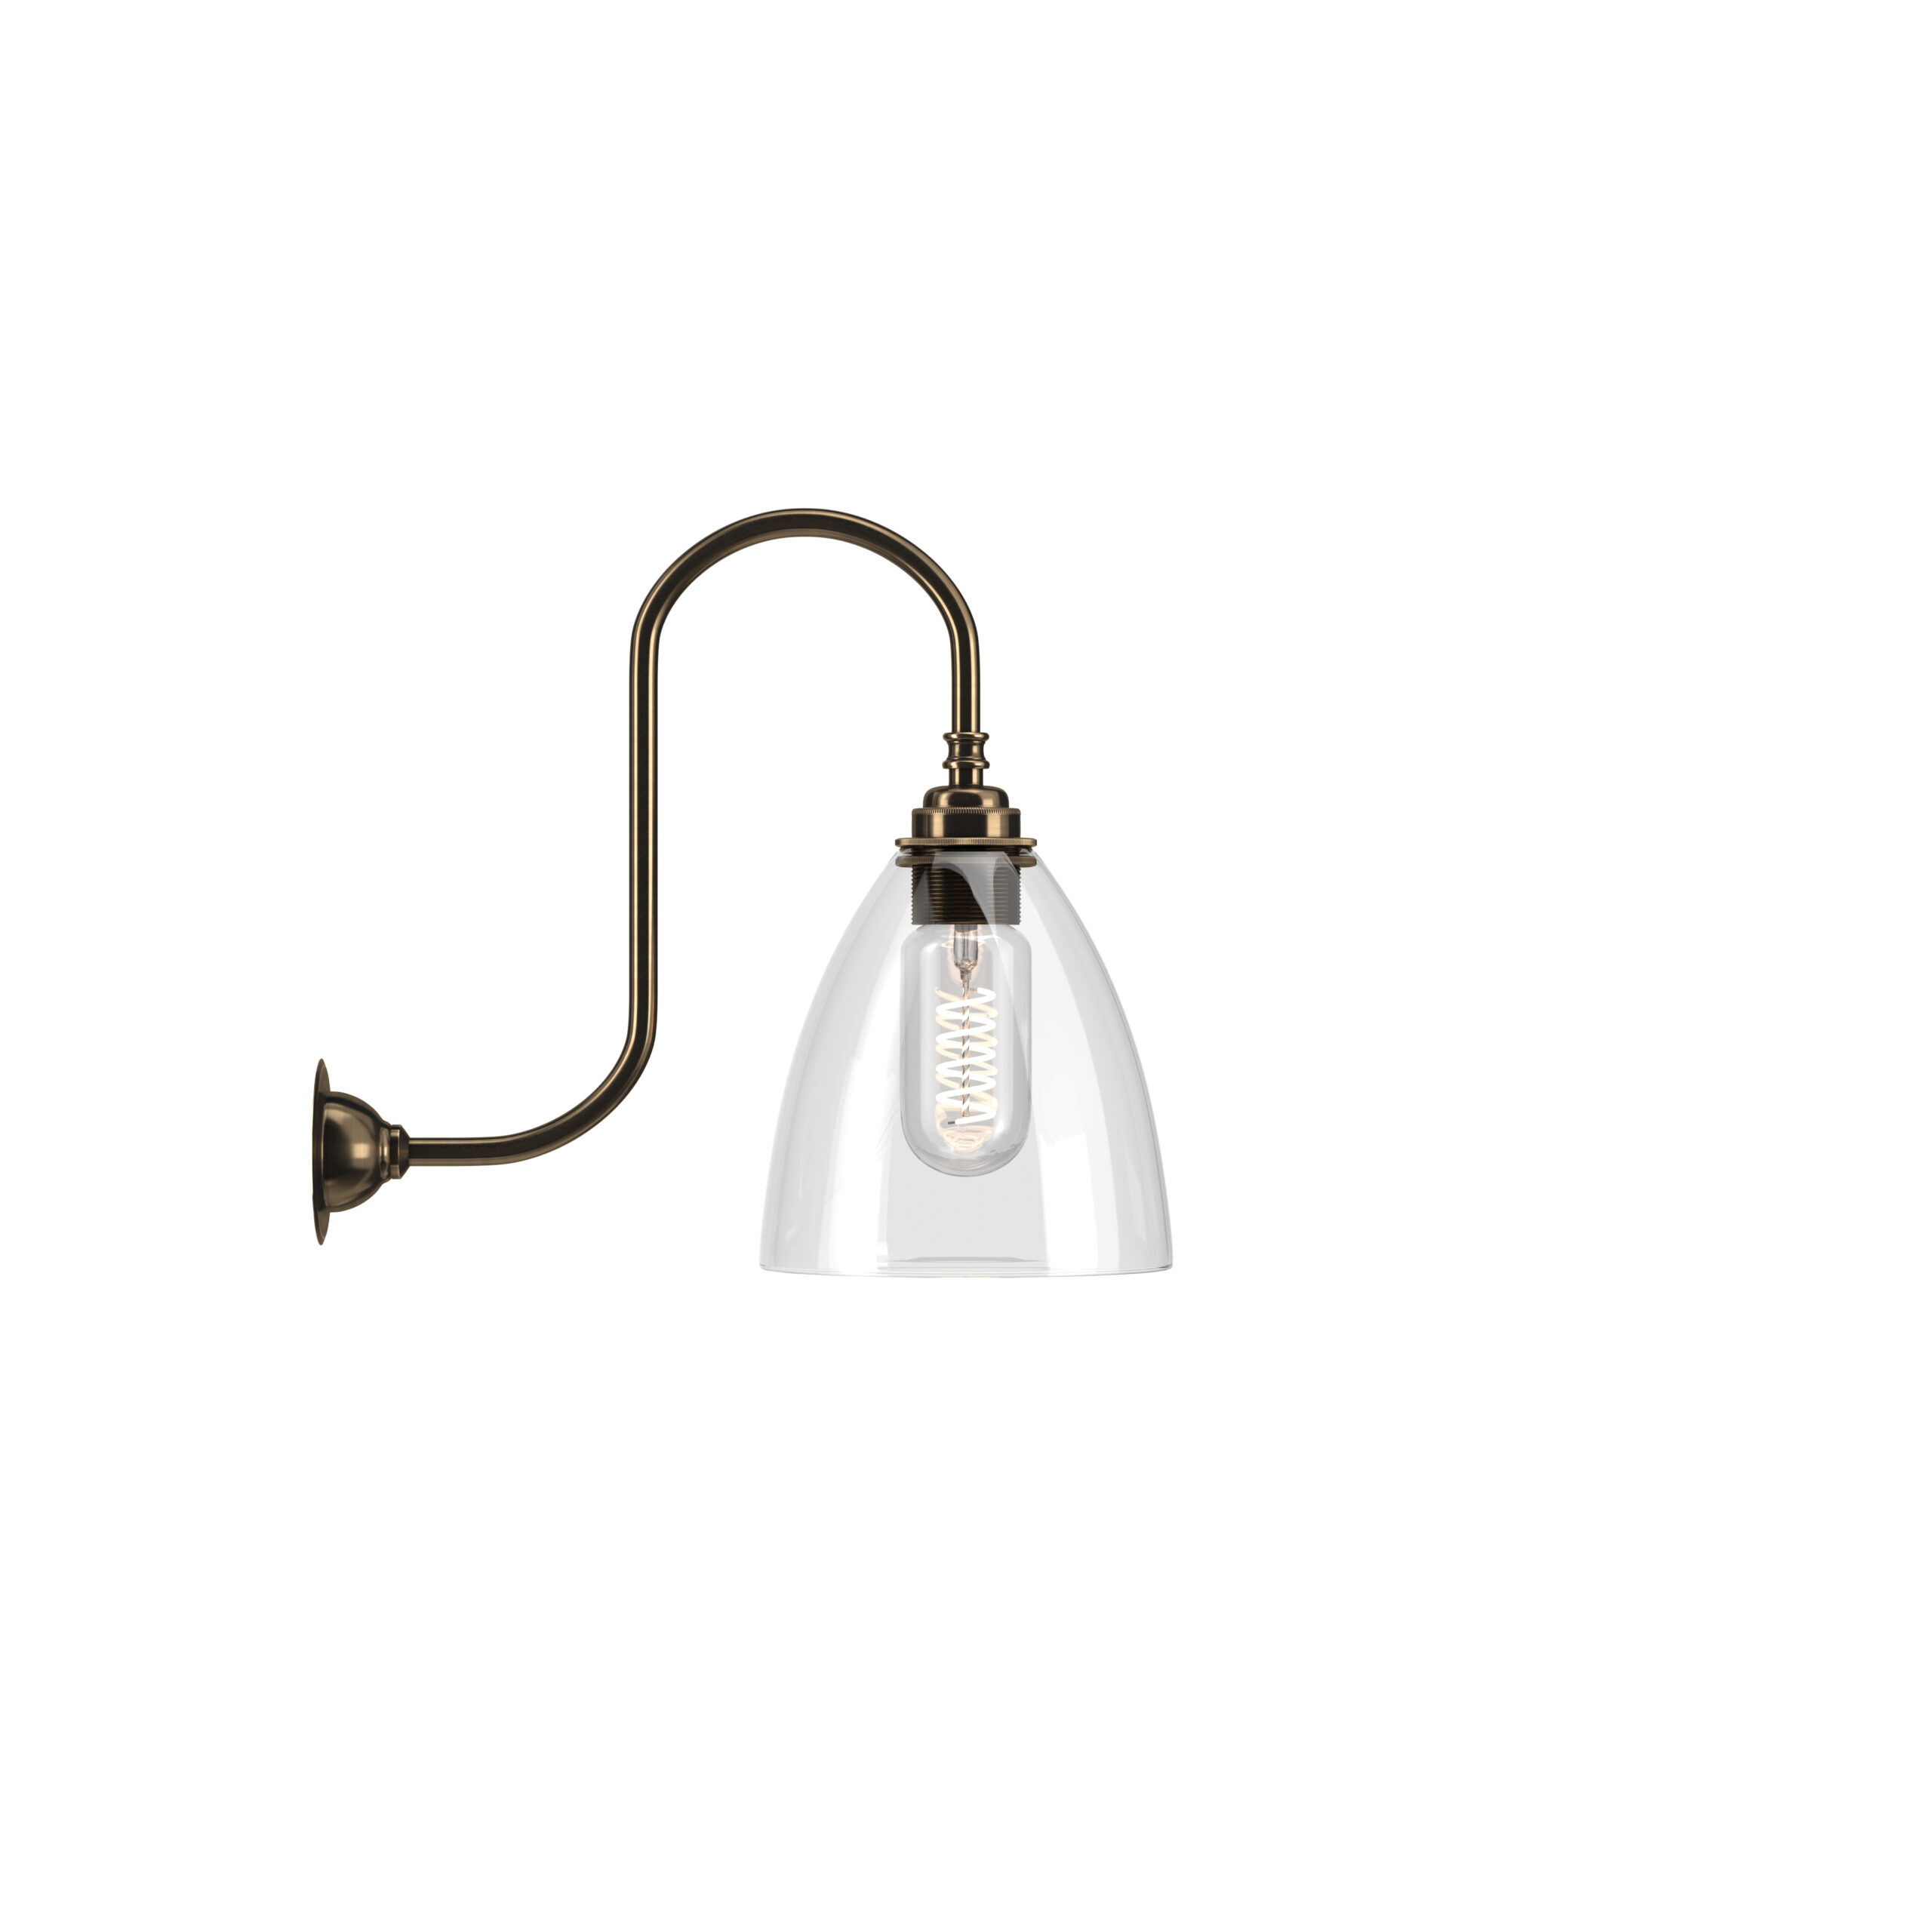 LEDBURY swan neck with clear shade and antique brass metal finish